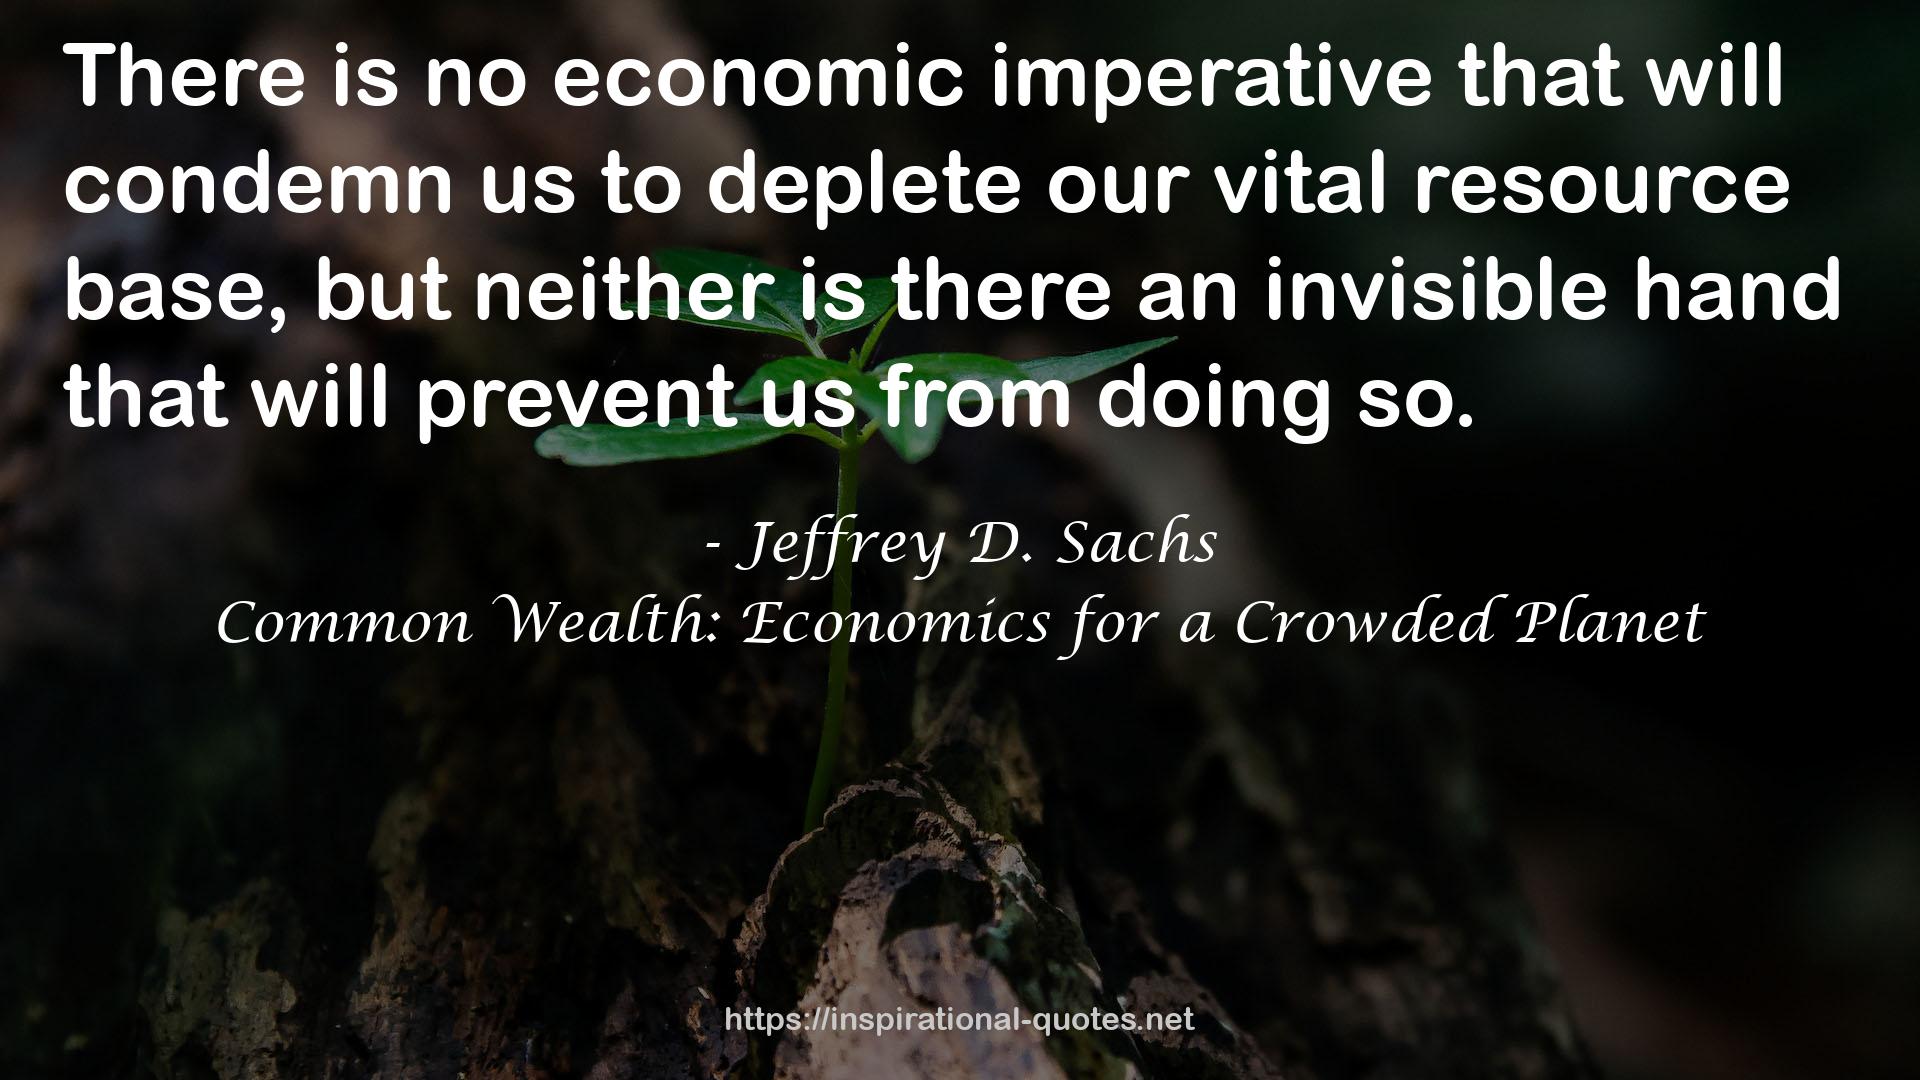 Common Wealth: Economics for a Crowded Planet QUOTES